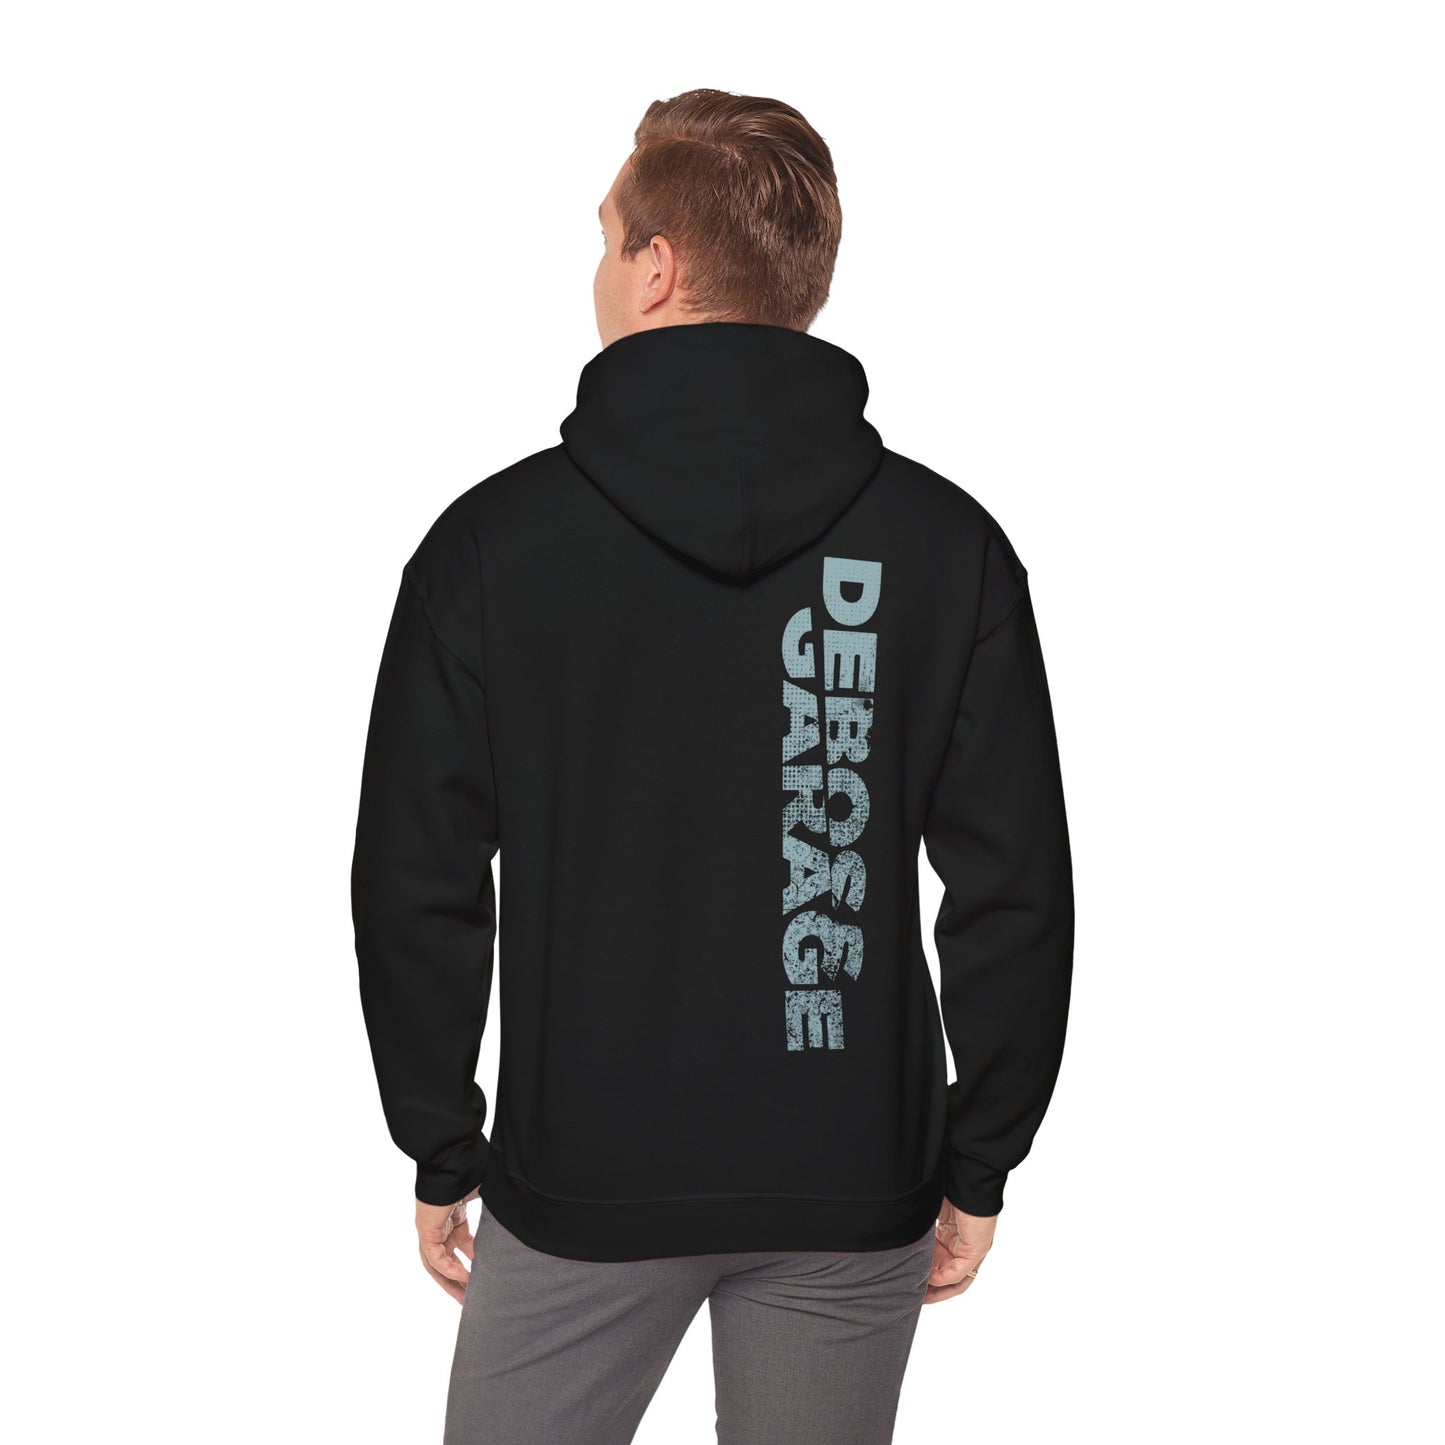 Respect All Builds Hoodie (3XL+)